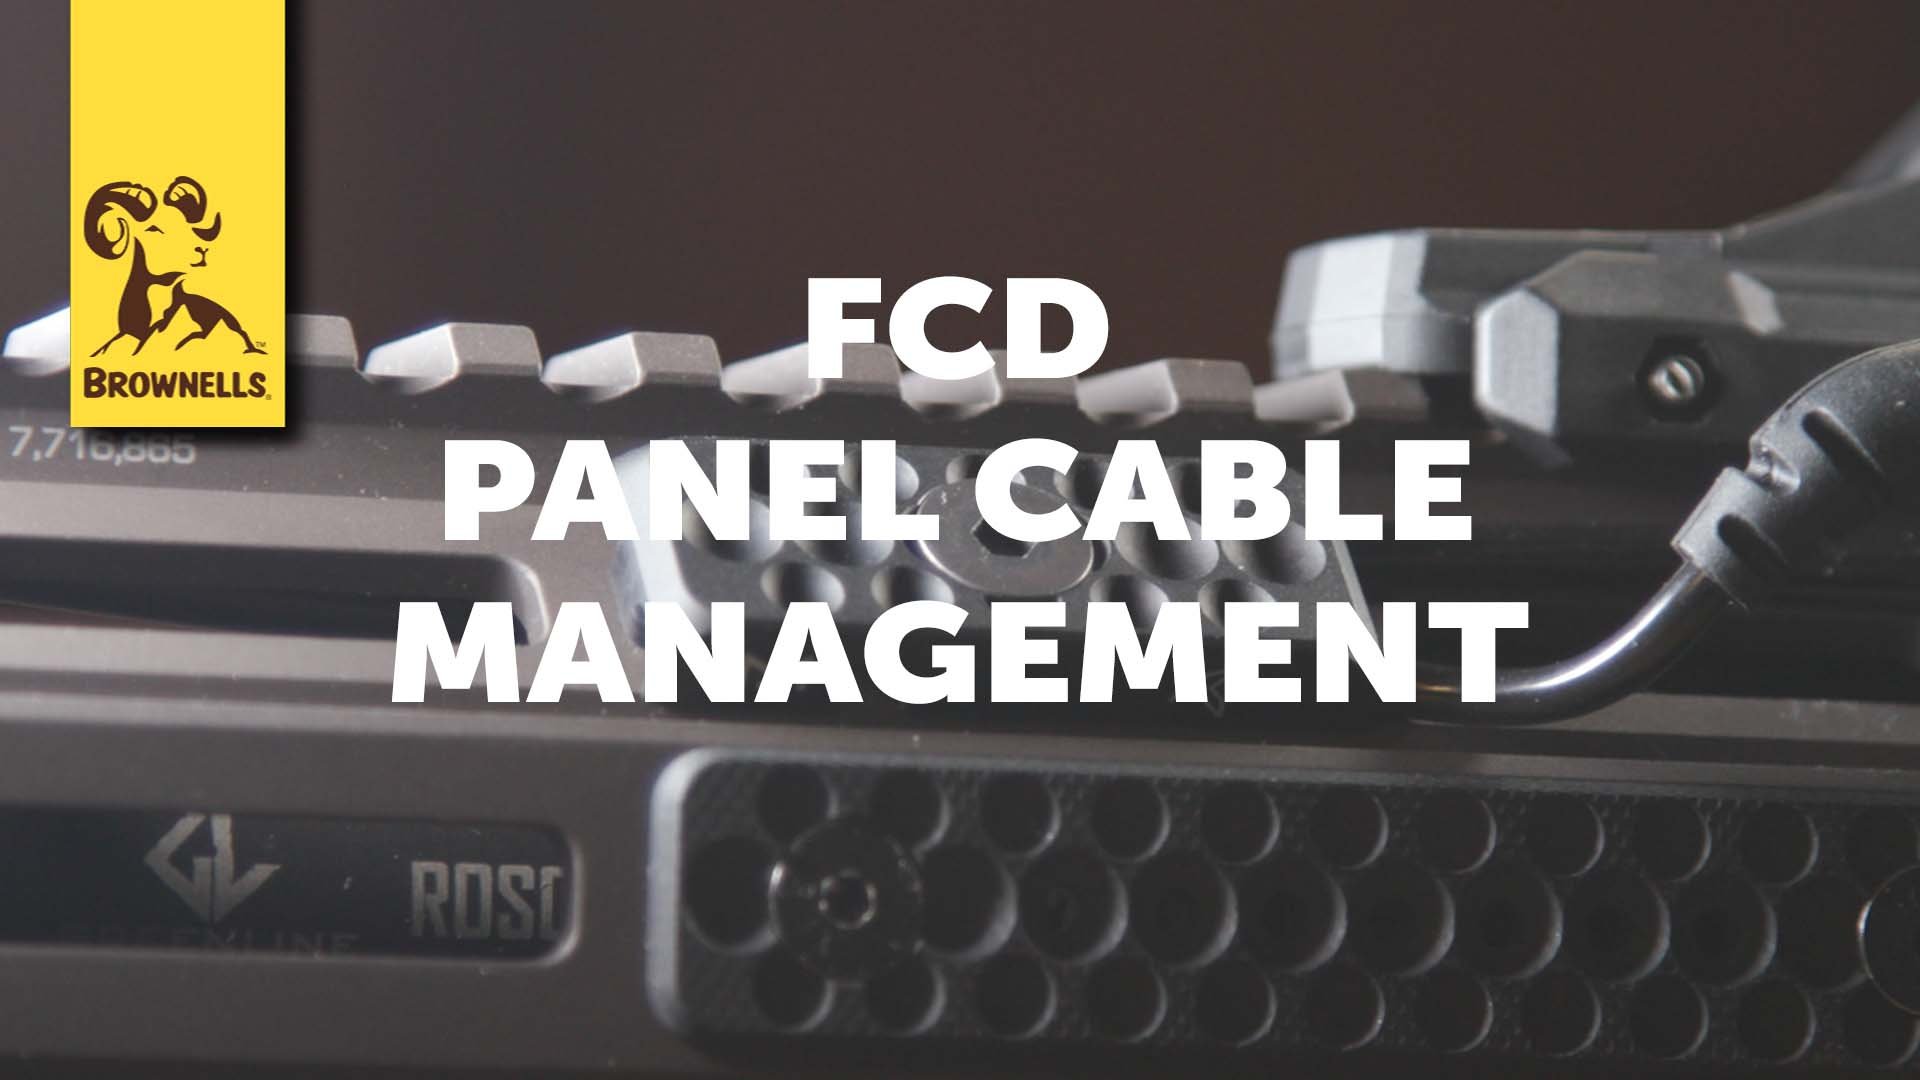 Product Spotlight: Forward Controls Panel Cable Management